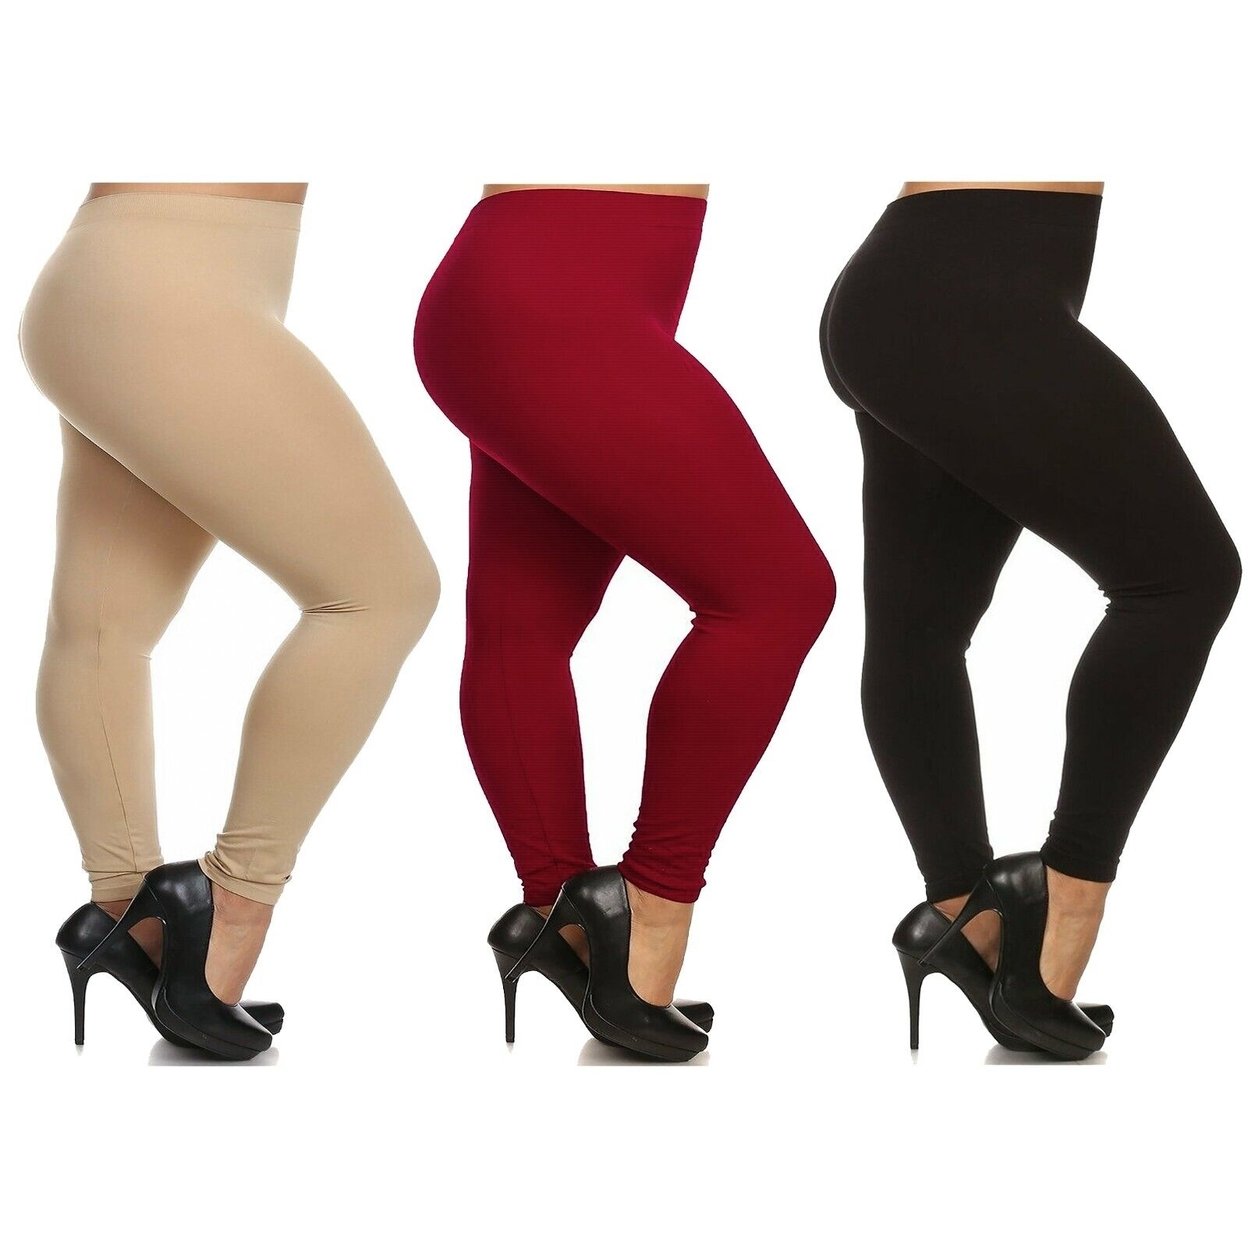 Women's Casual Ultra Soft Smooth High Waisted Athletic Active Yoga Leggings Plus Size Available - Red, 2x